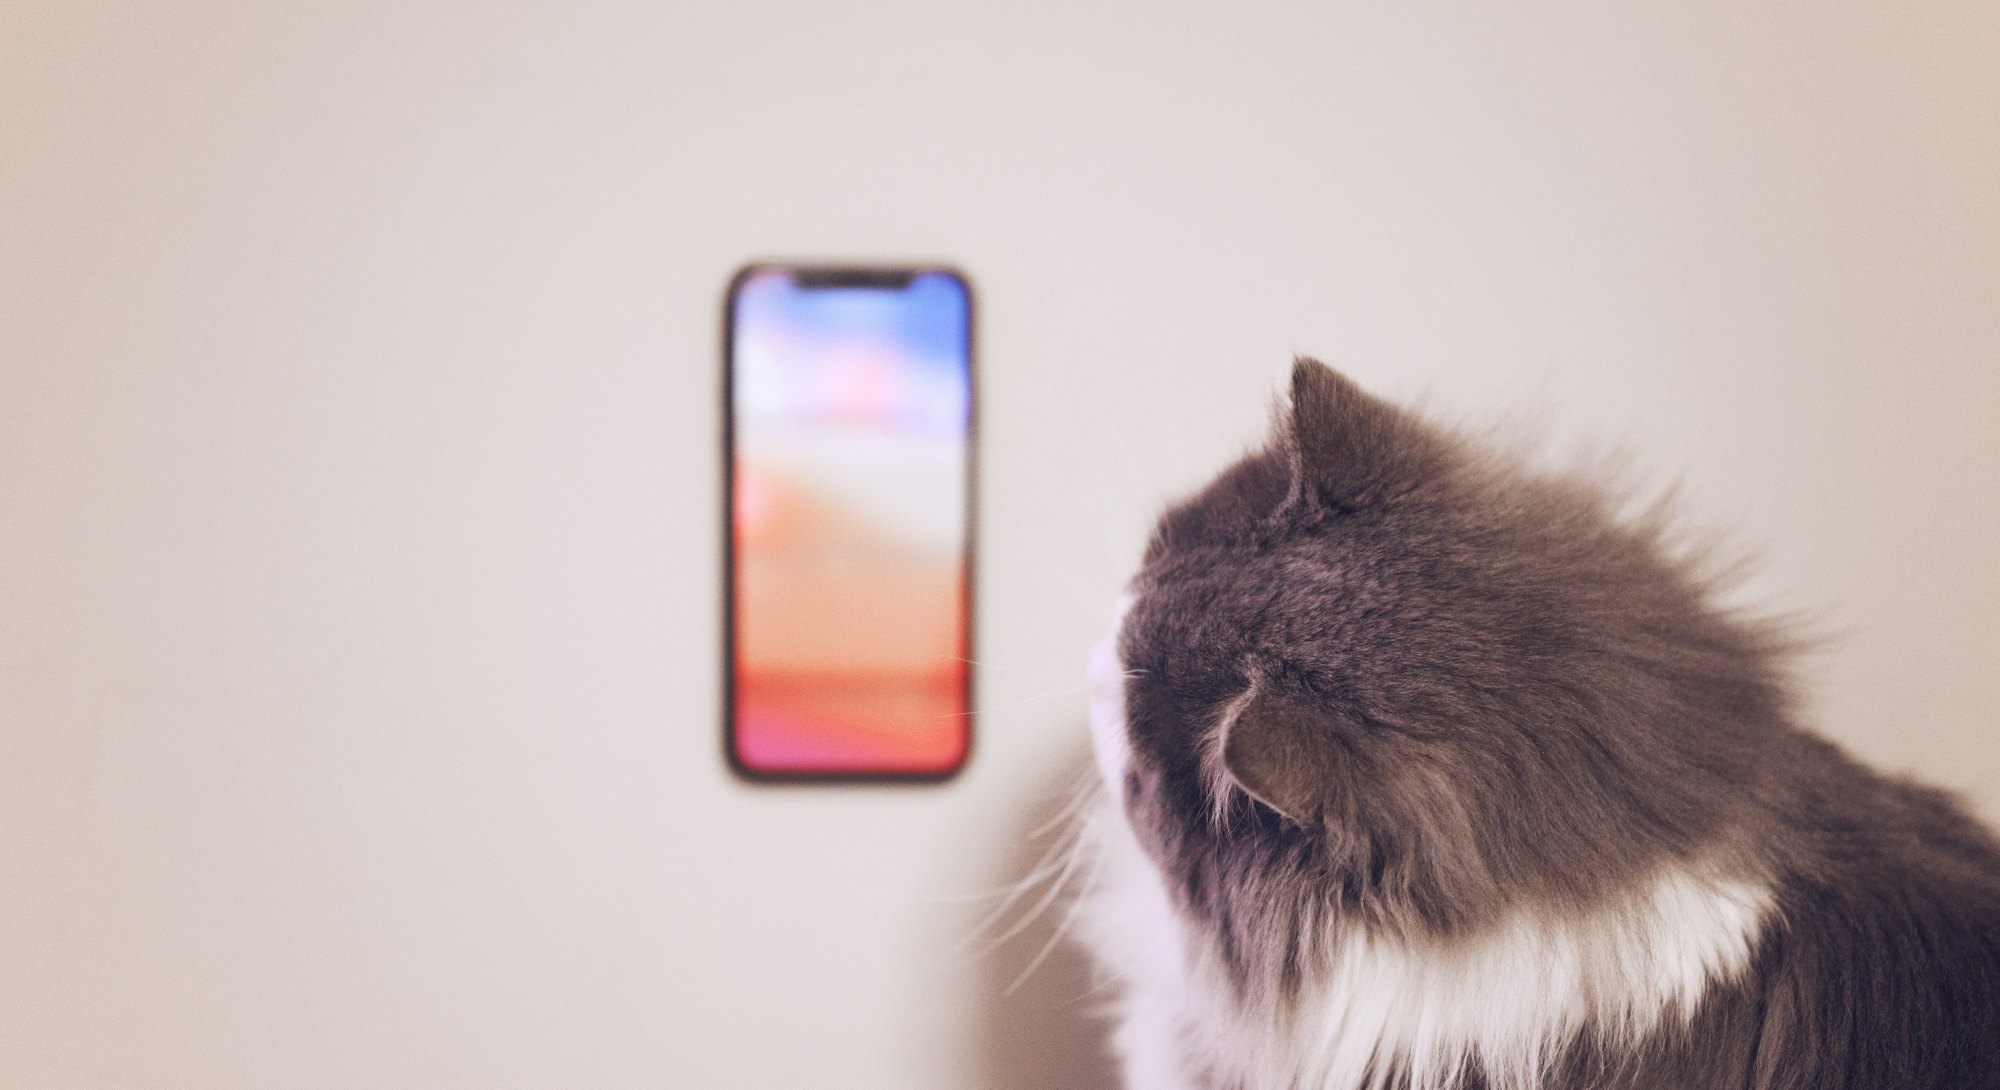 A cat looks at a locked iPhone screen.